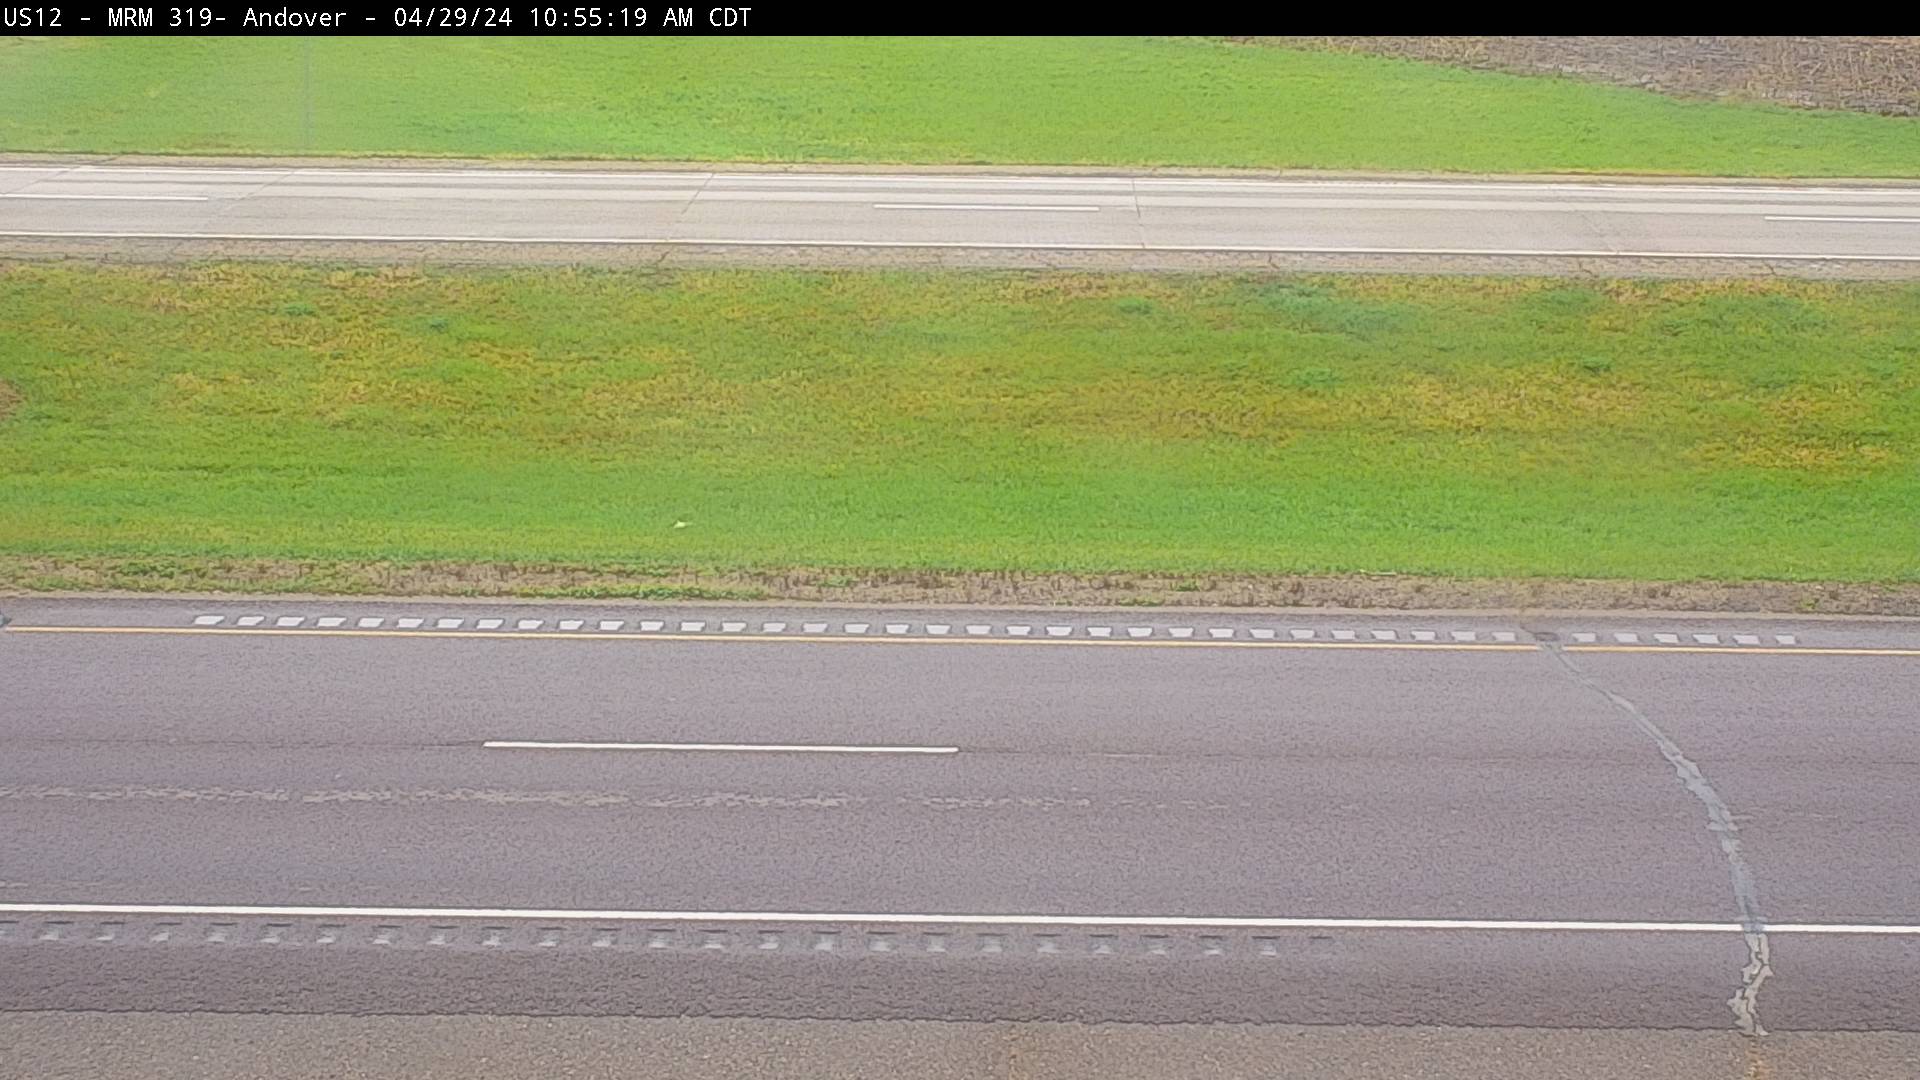 North of town along US-12 - Northeast Traffic Camera